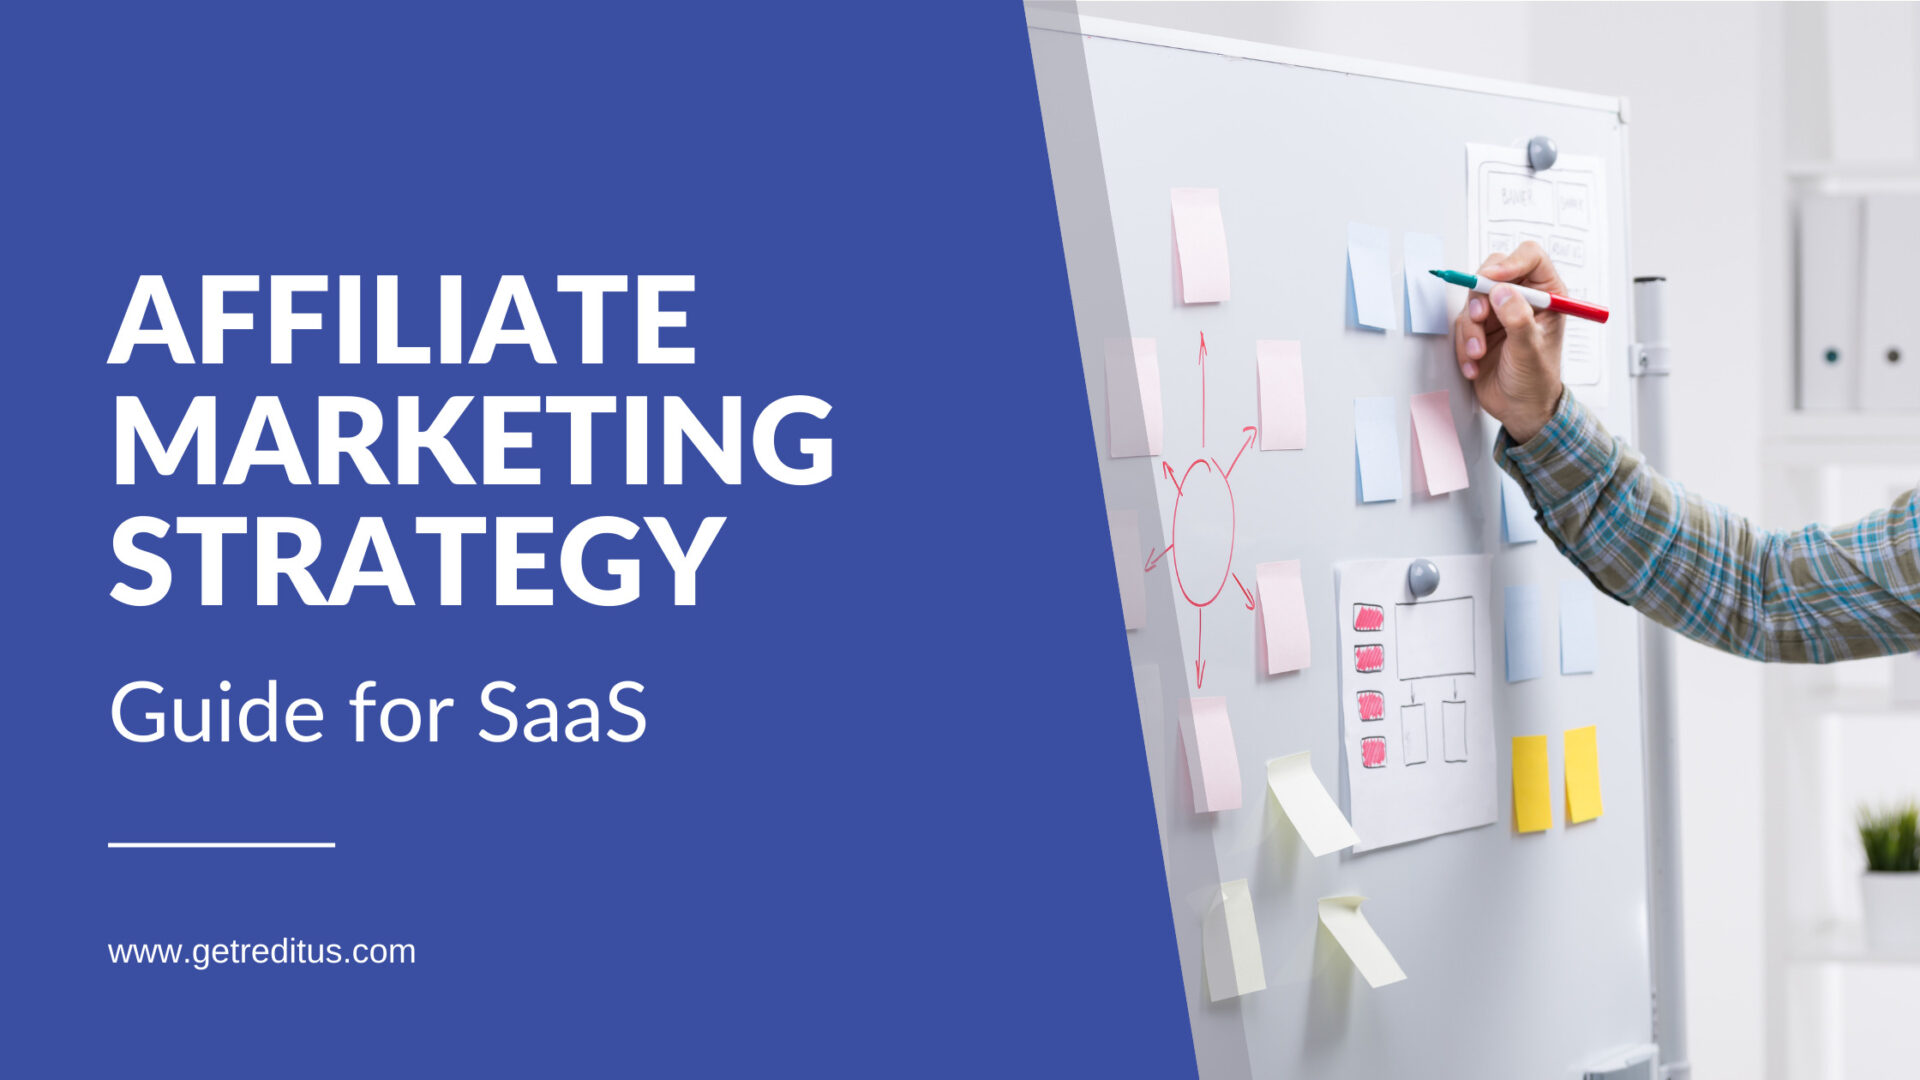 What is Affiliate Marketing Strategy: Guide for B2B SaaS